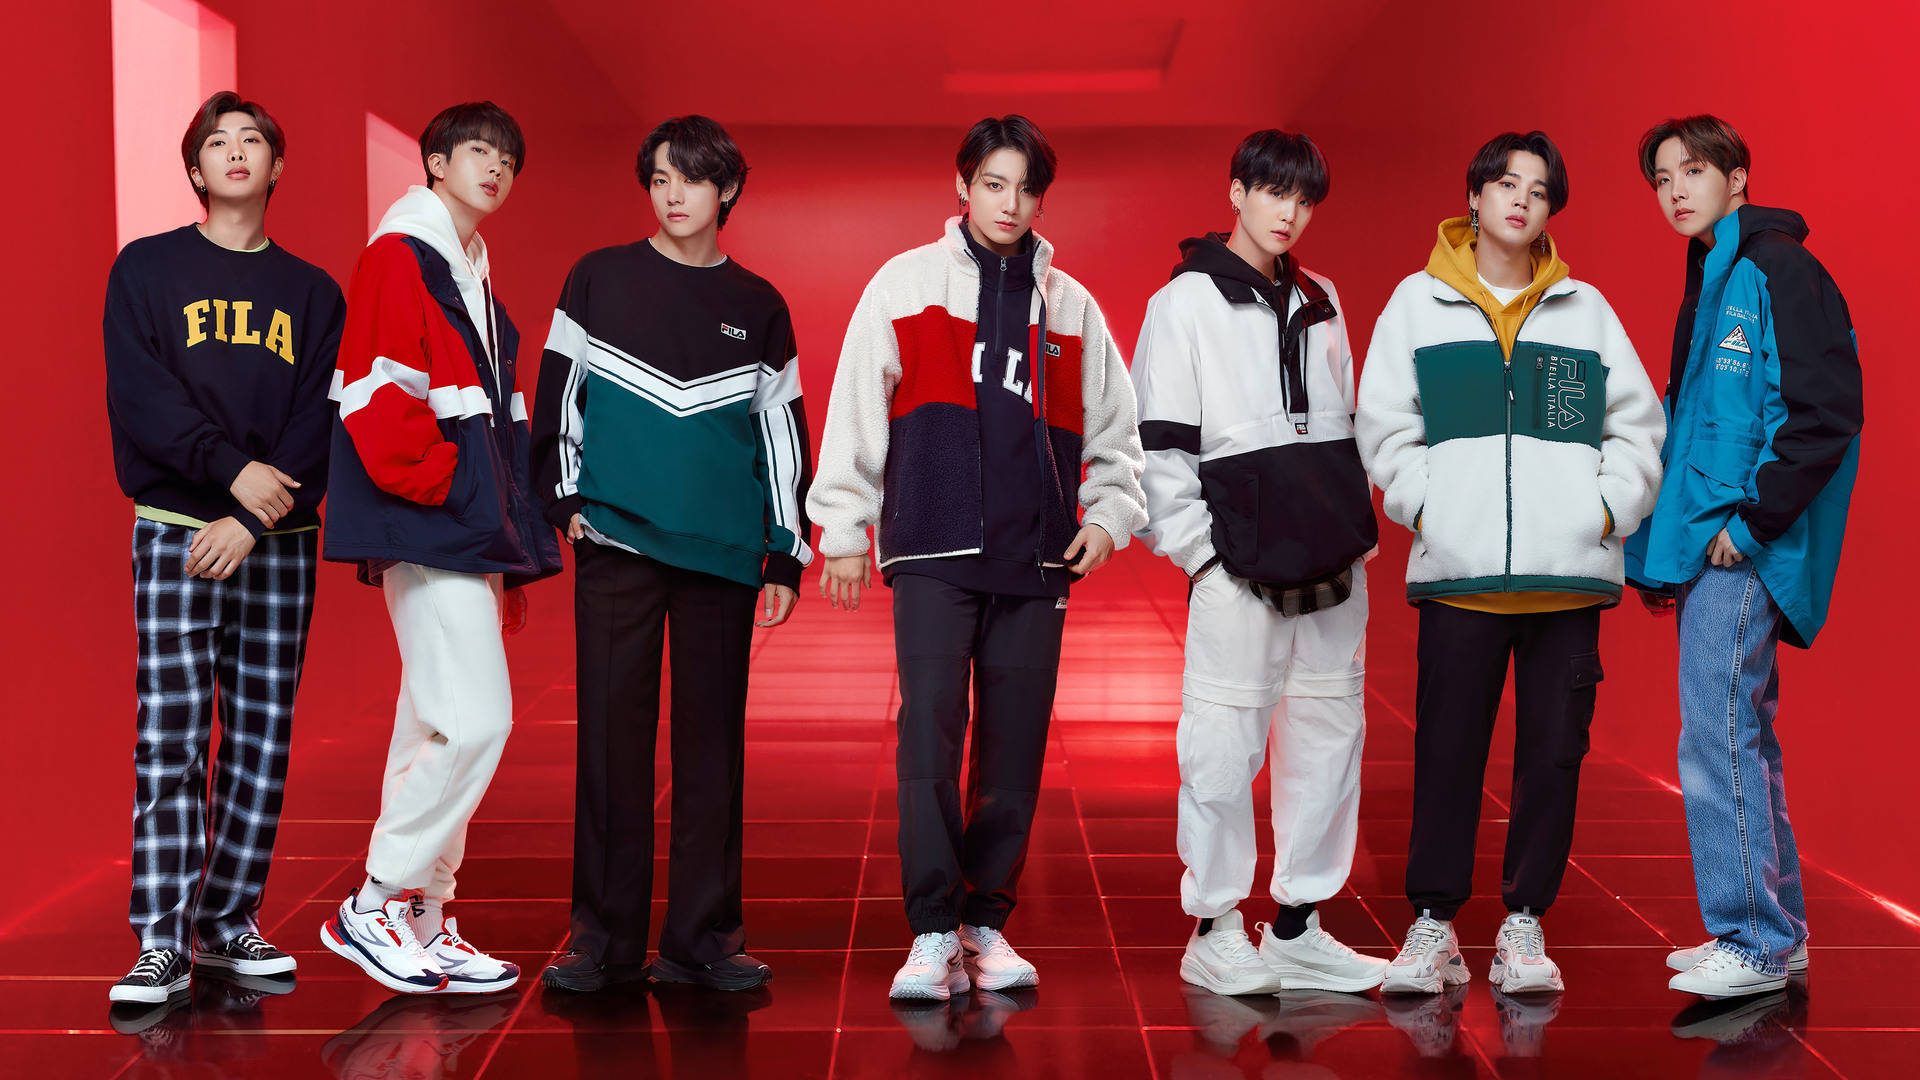 Bts Group Photo For Fila Background